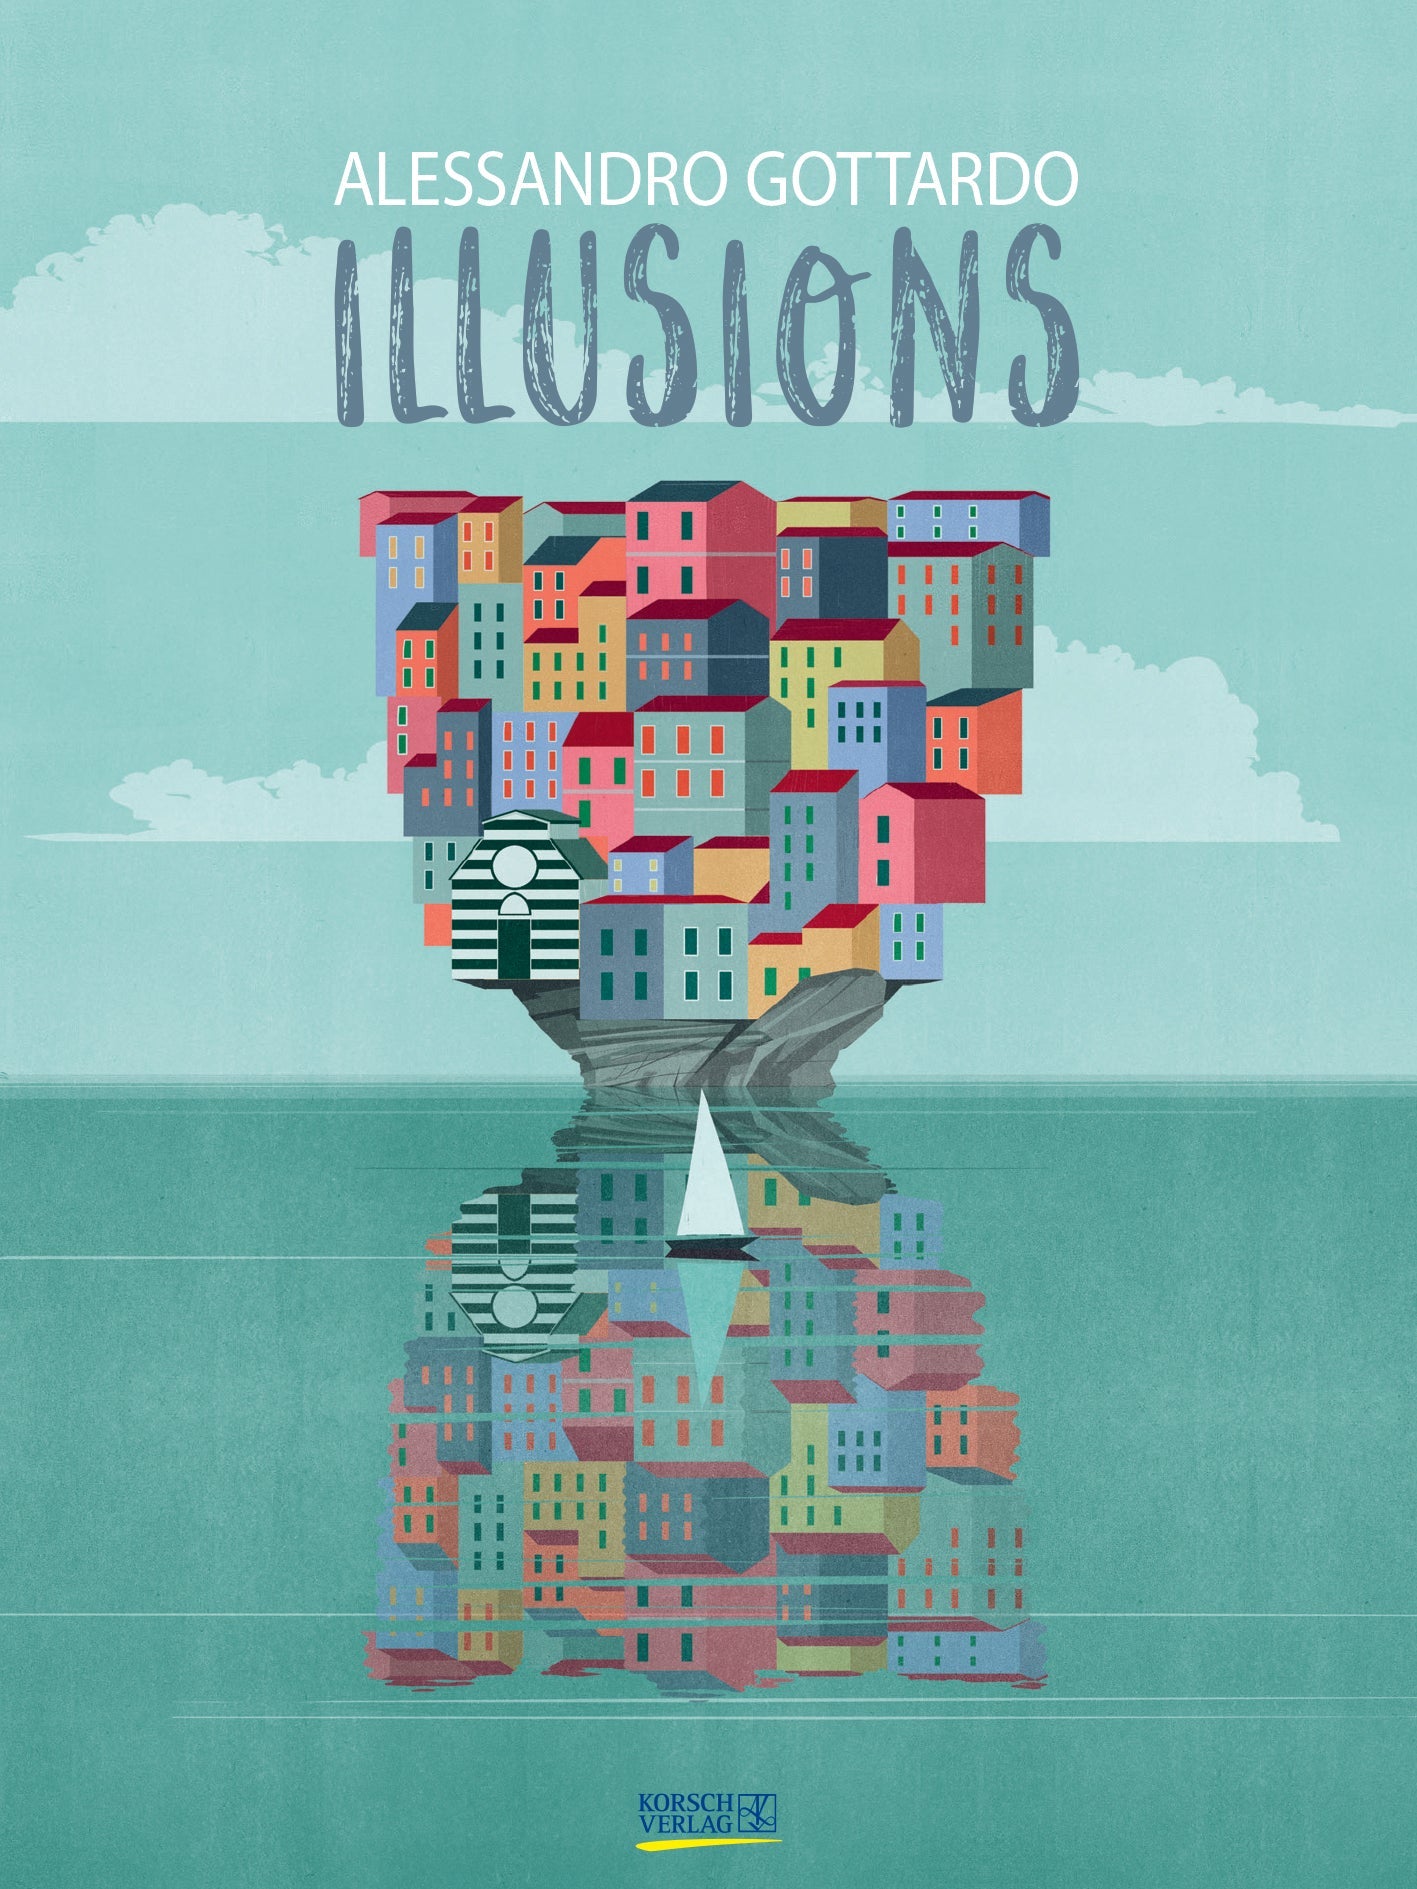 2023 Illusions-Alessandro Gottardo (Large) - Deluxe Wall Poster Calendar